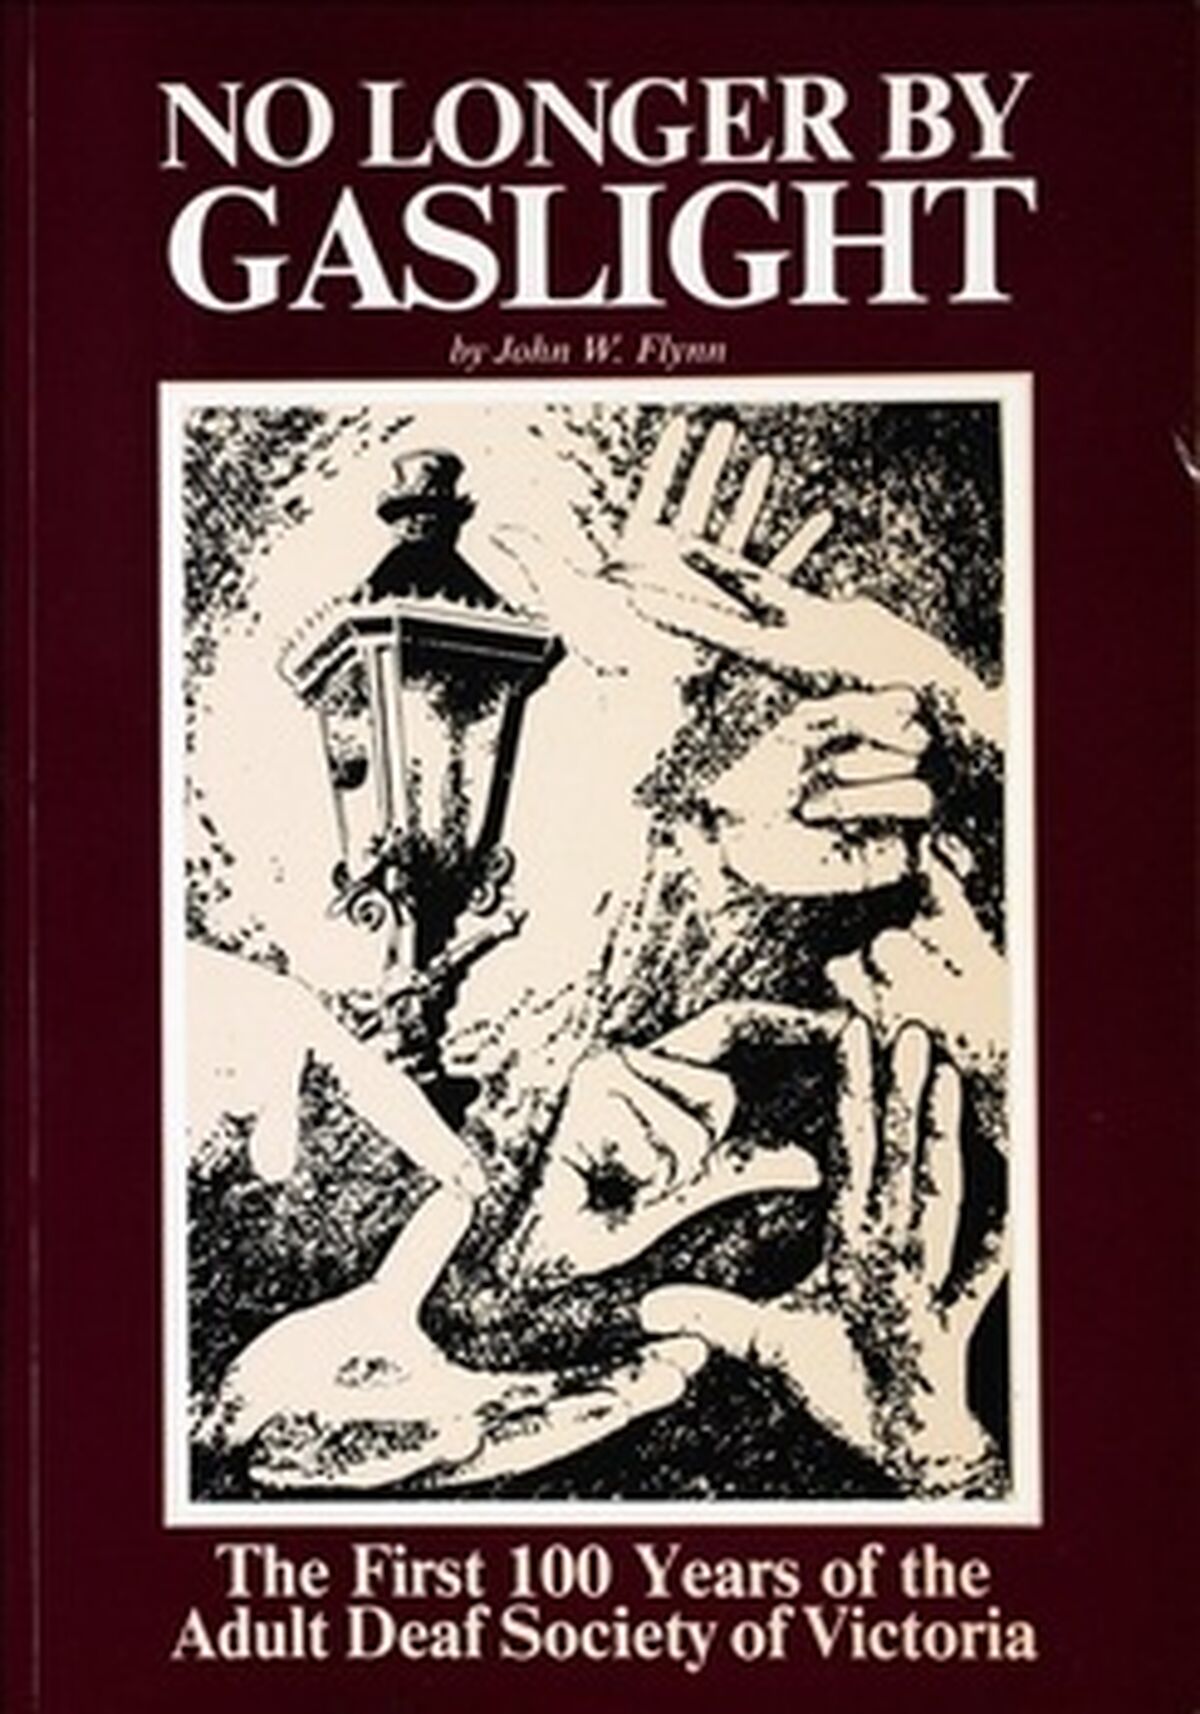 No Longer by Gaslight - The first 100 years of the Adult Deaf Society of Victoria (cover image)